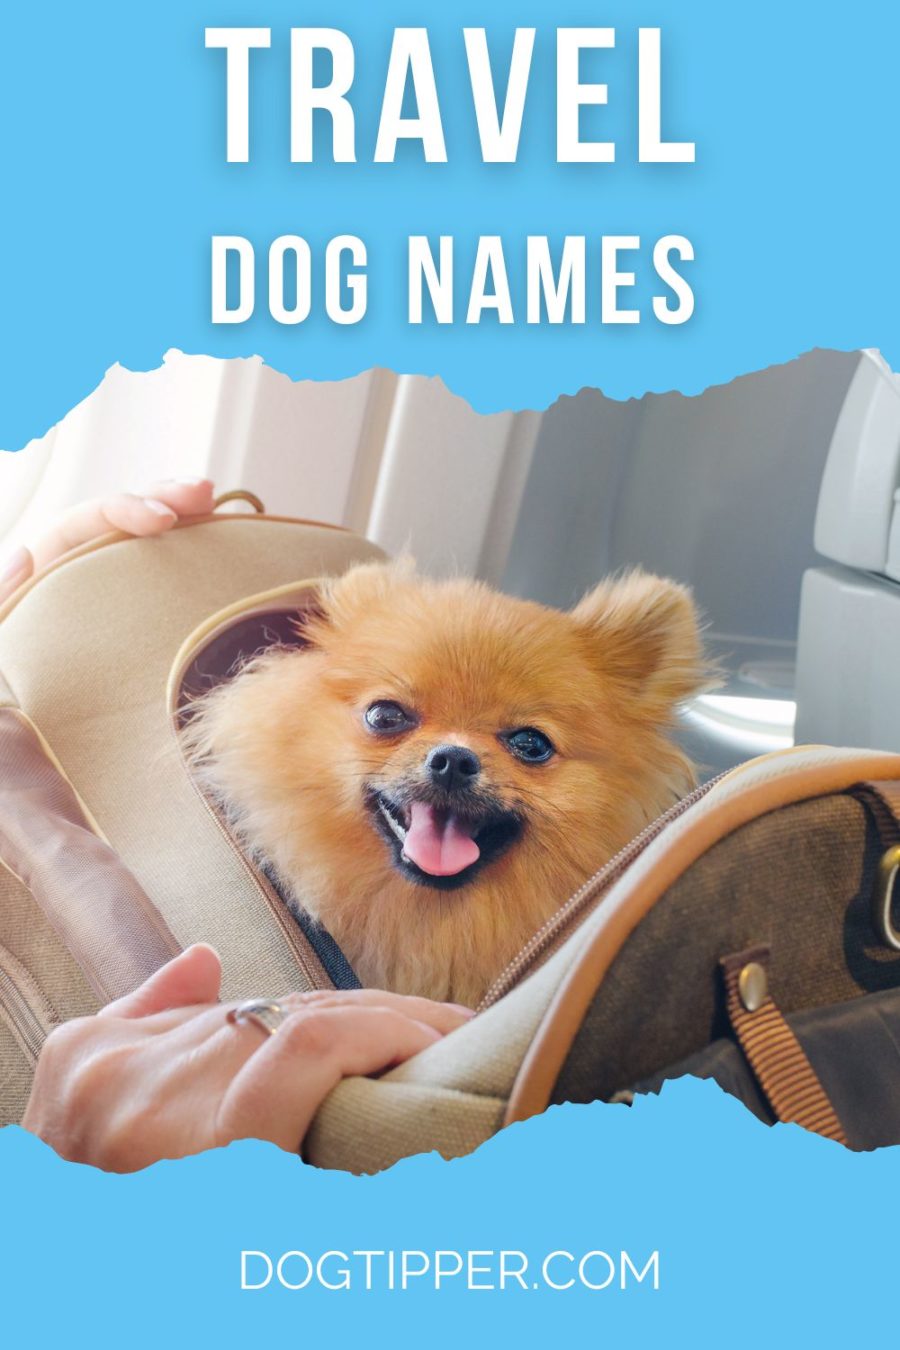 Travel Dog Names for Your New Puppy!